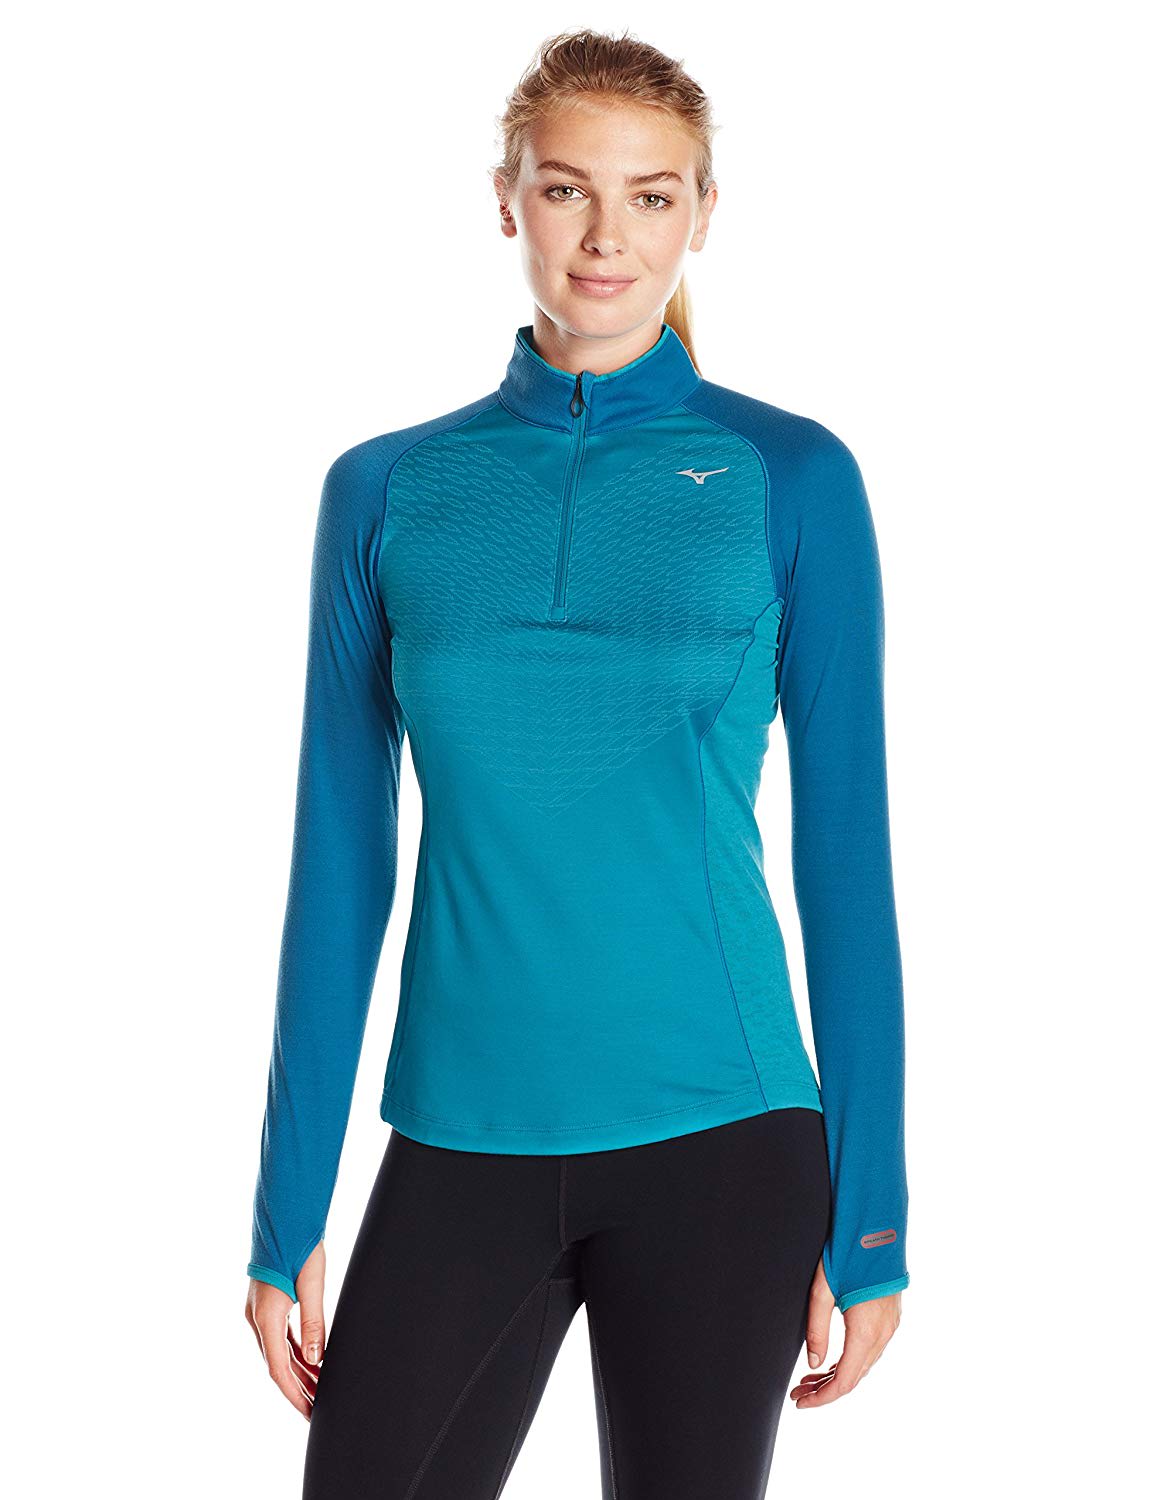 Cold Weather Running Gear. Nike.com